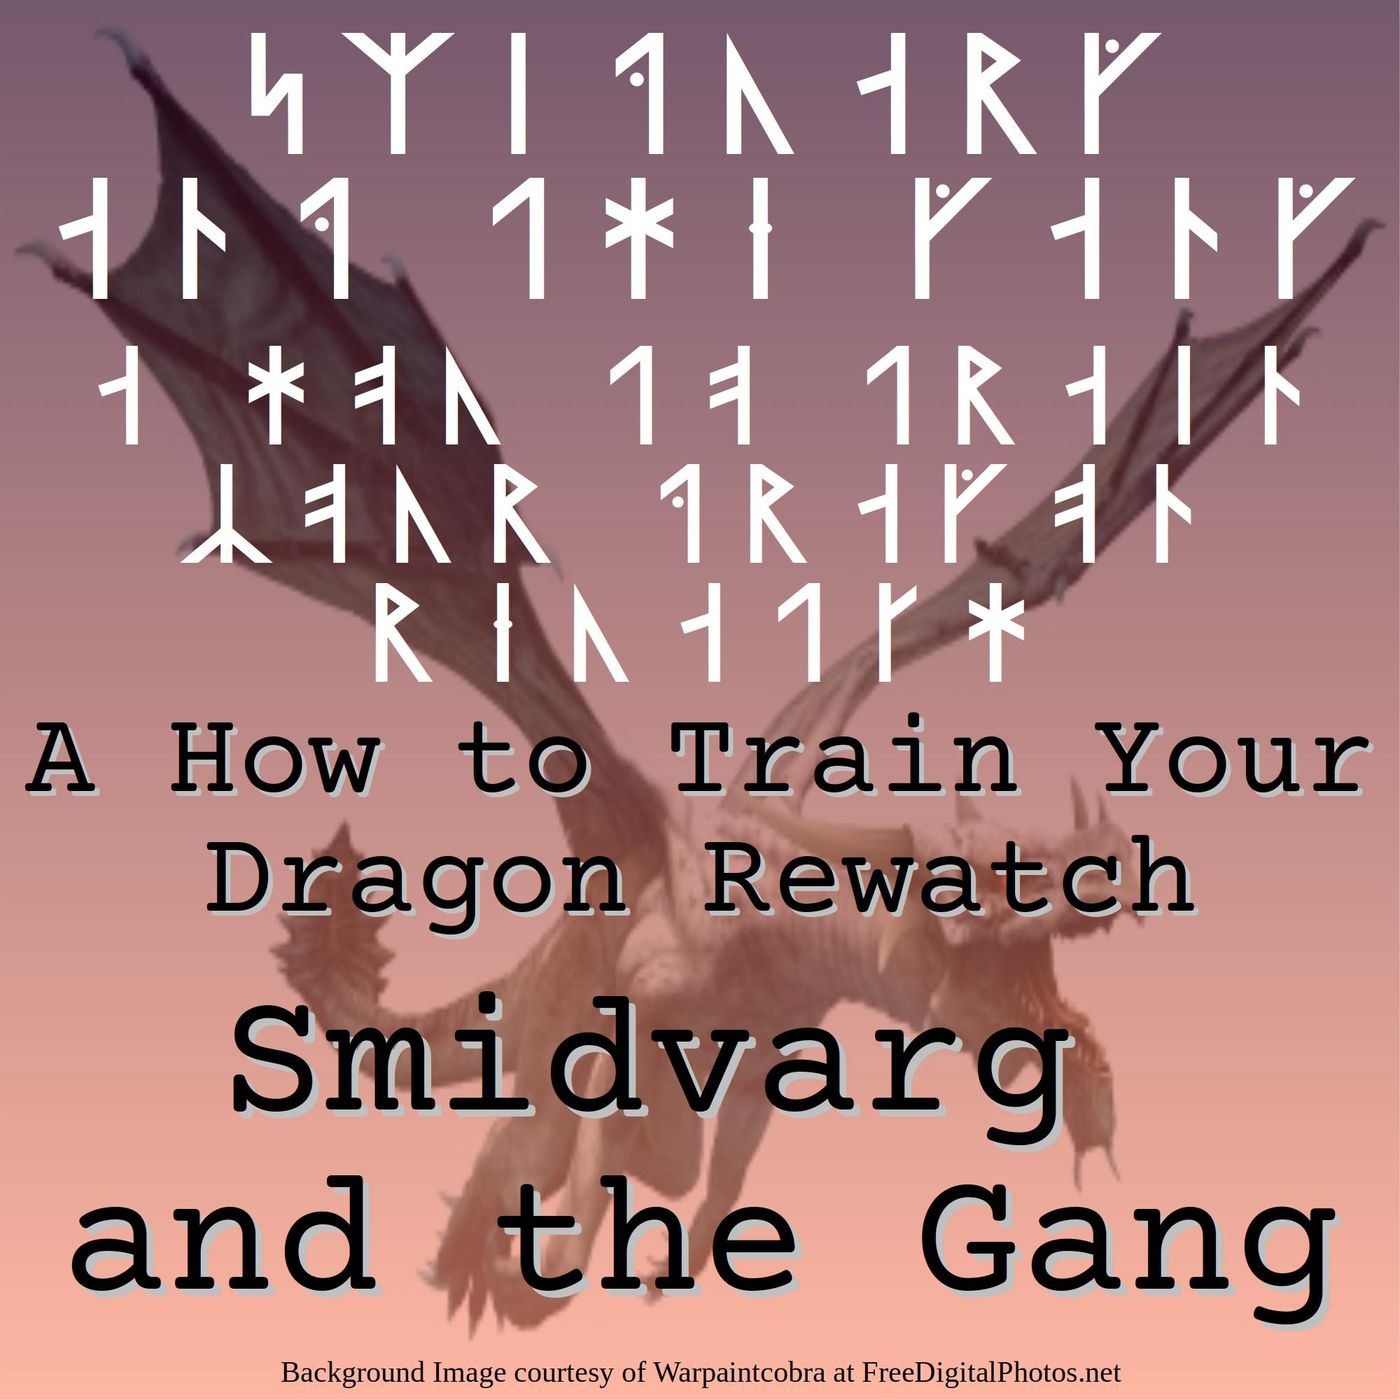 Smidvarg and the Gang: A How to Train Your Dragon Rewatch Podcast